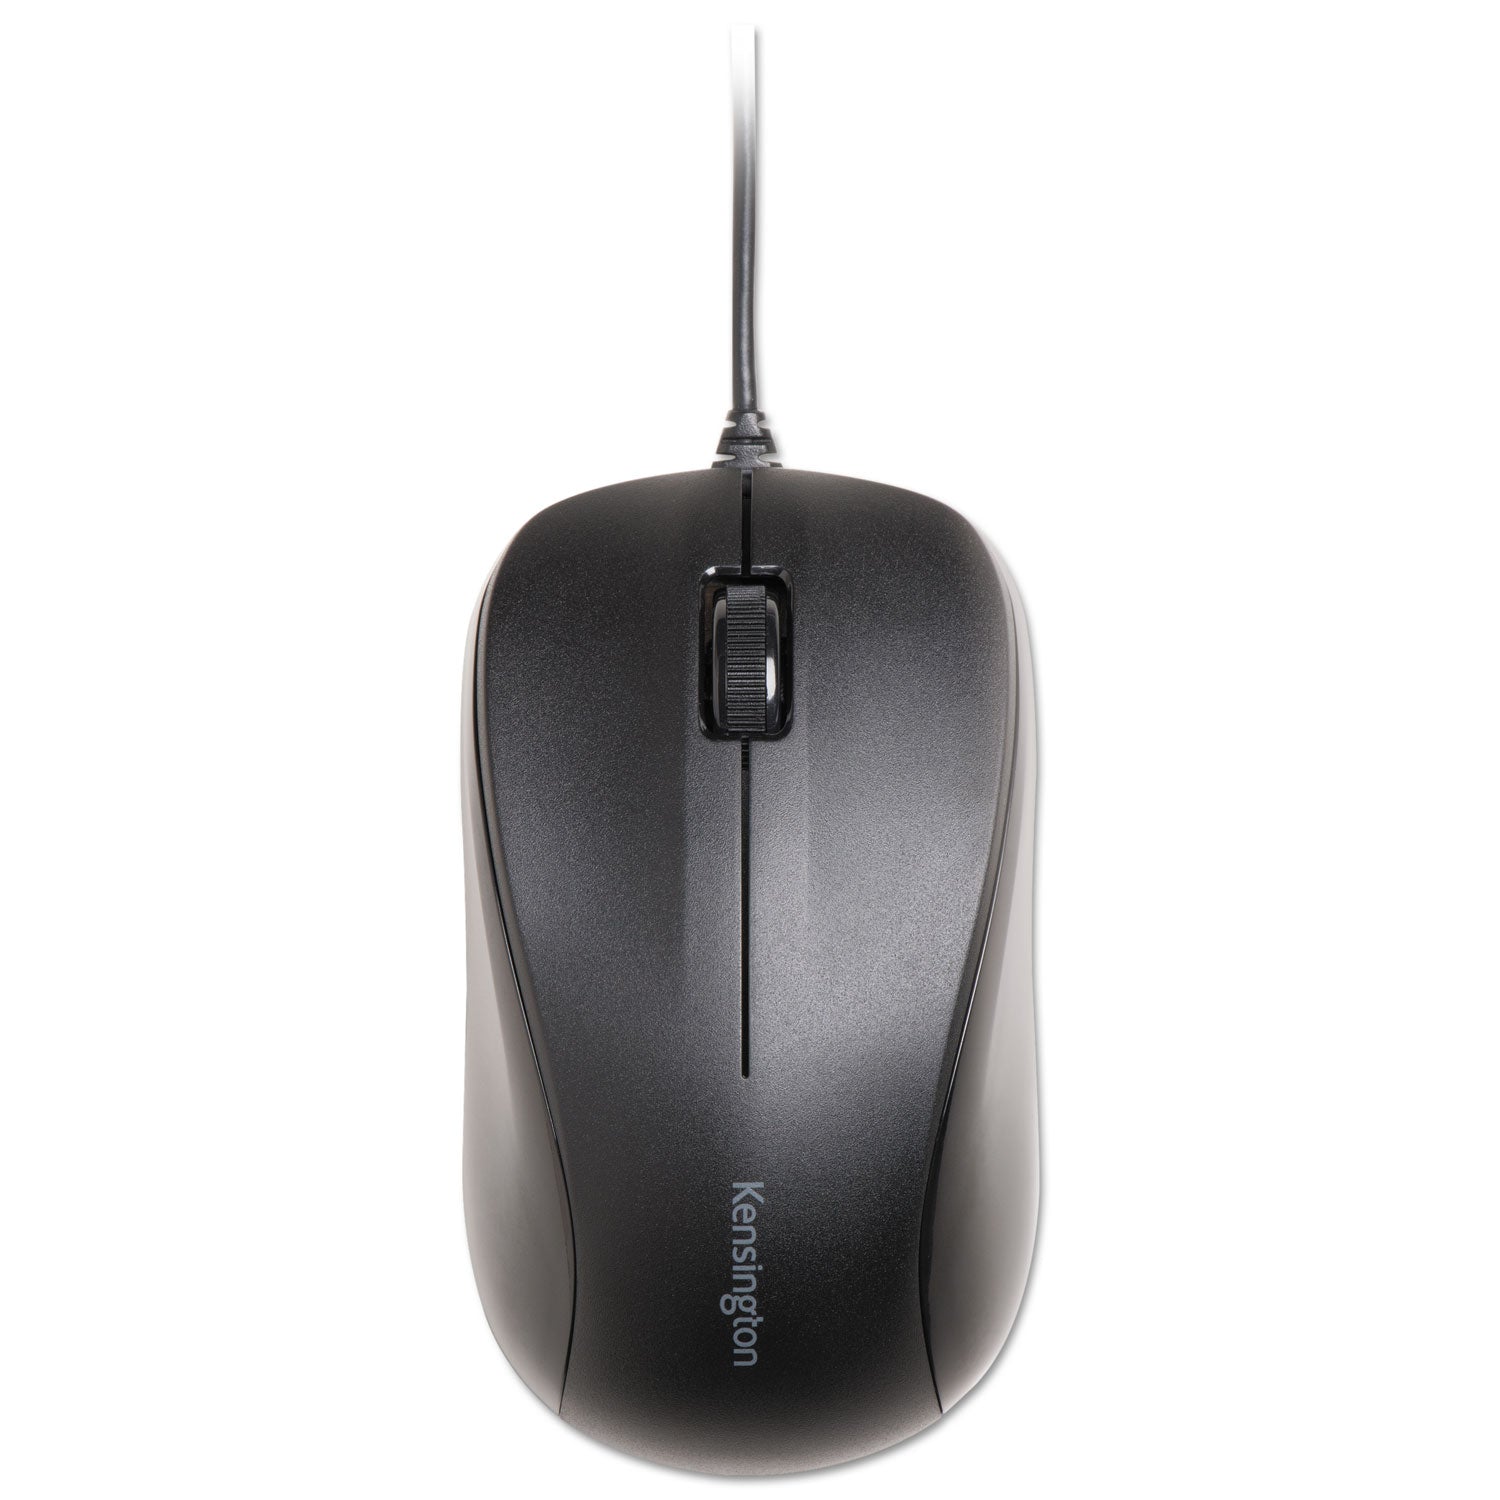 Wired USB Mouse for Life, USB 2.0, Left/Right Hand Use, Black - 1